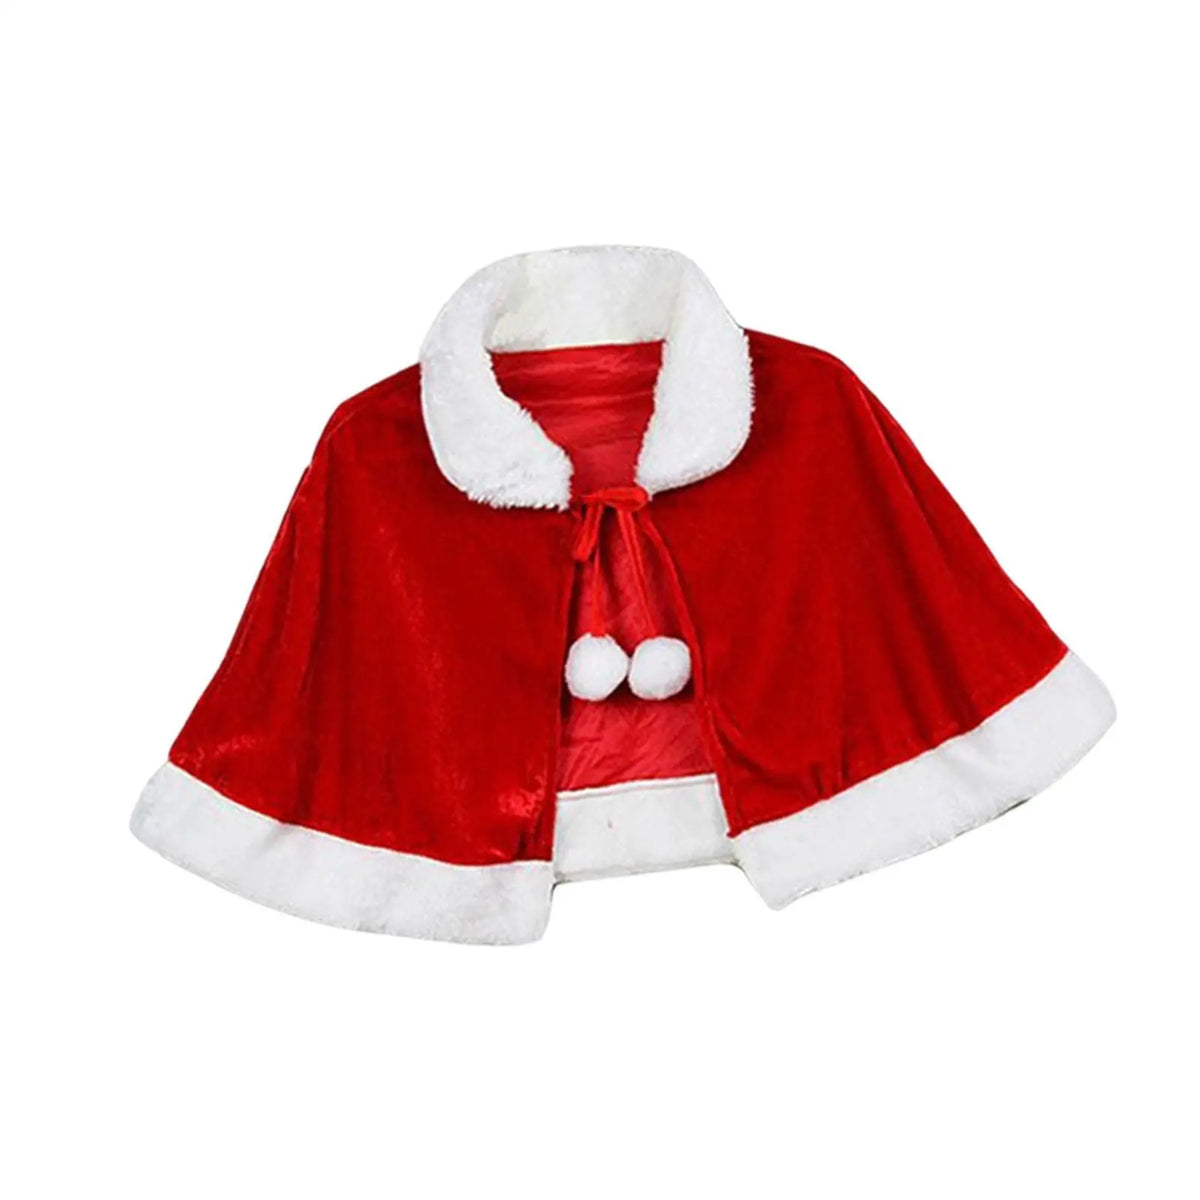 New Year Winter Red Velvet Cape Cloak Christmas Women Girl Shawl Party Costumes Dress Decoration Santa Claus Costume Fashion